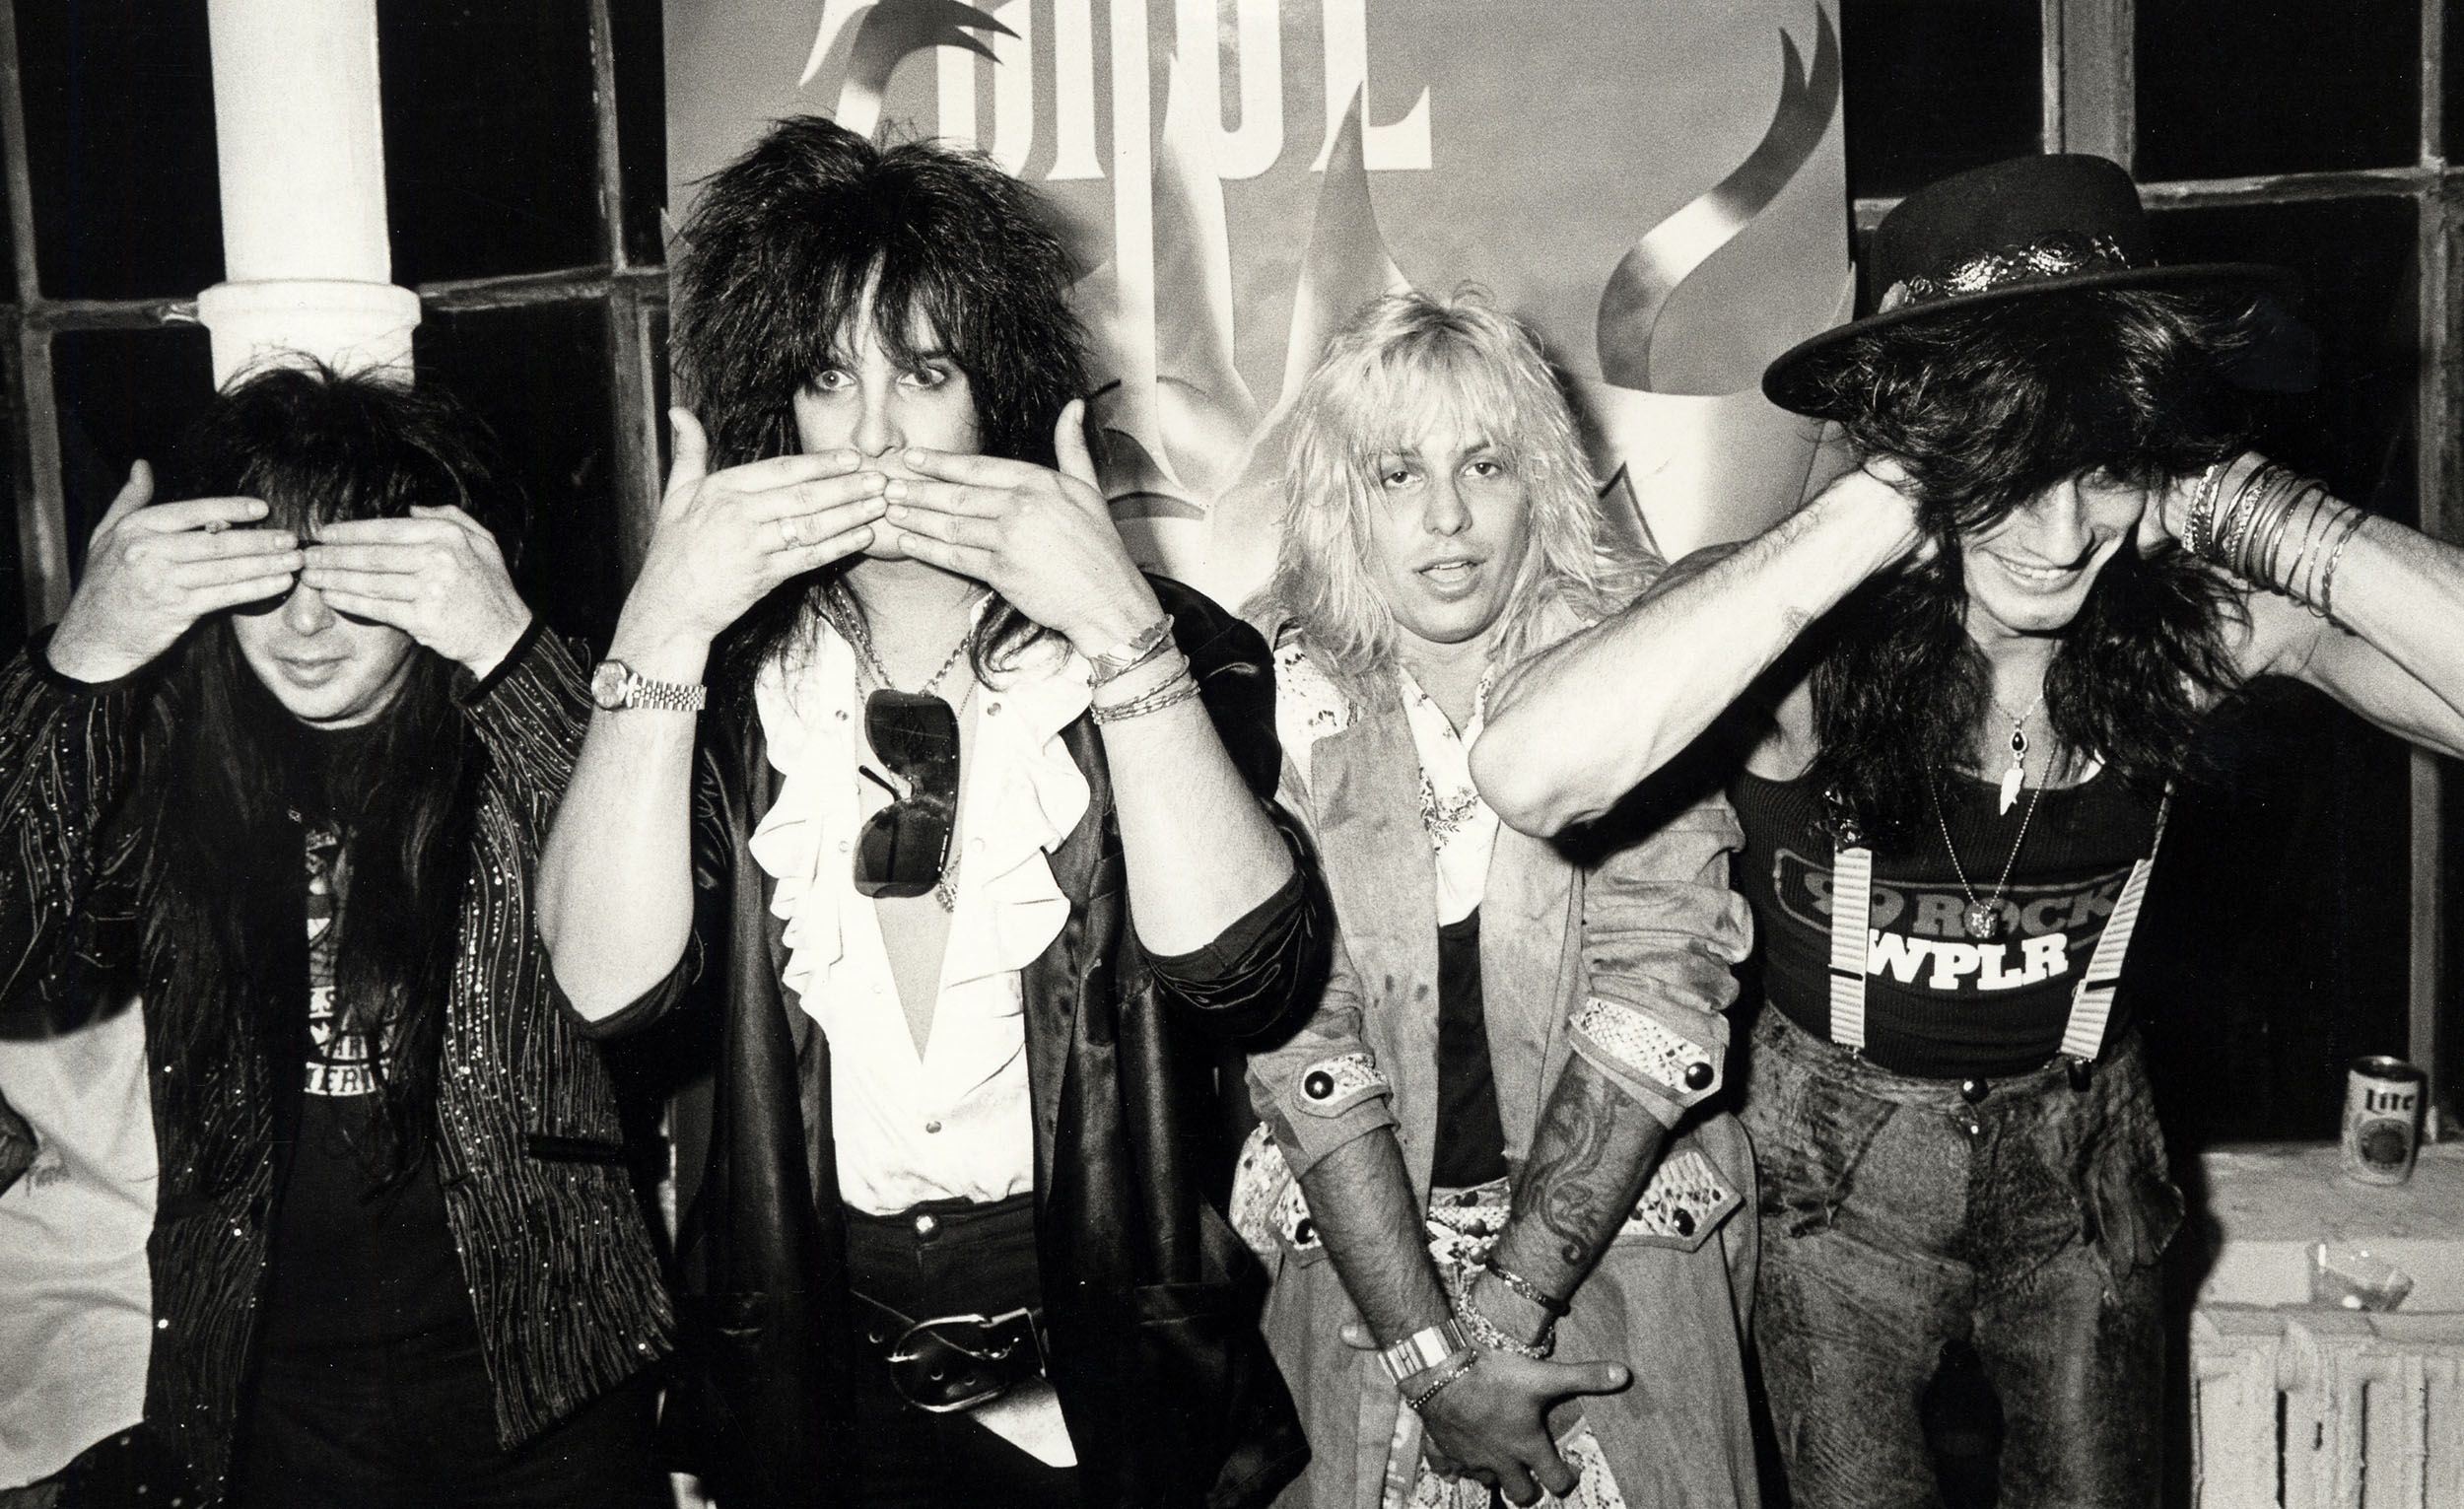 Motley Crue Photos - Pictures of Motley Crue Partying and Playing Music in the 1980s 2500x1540